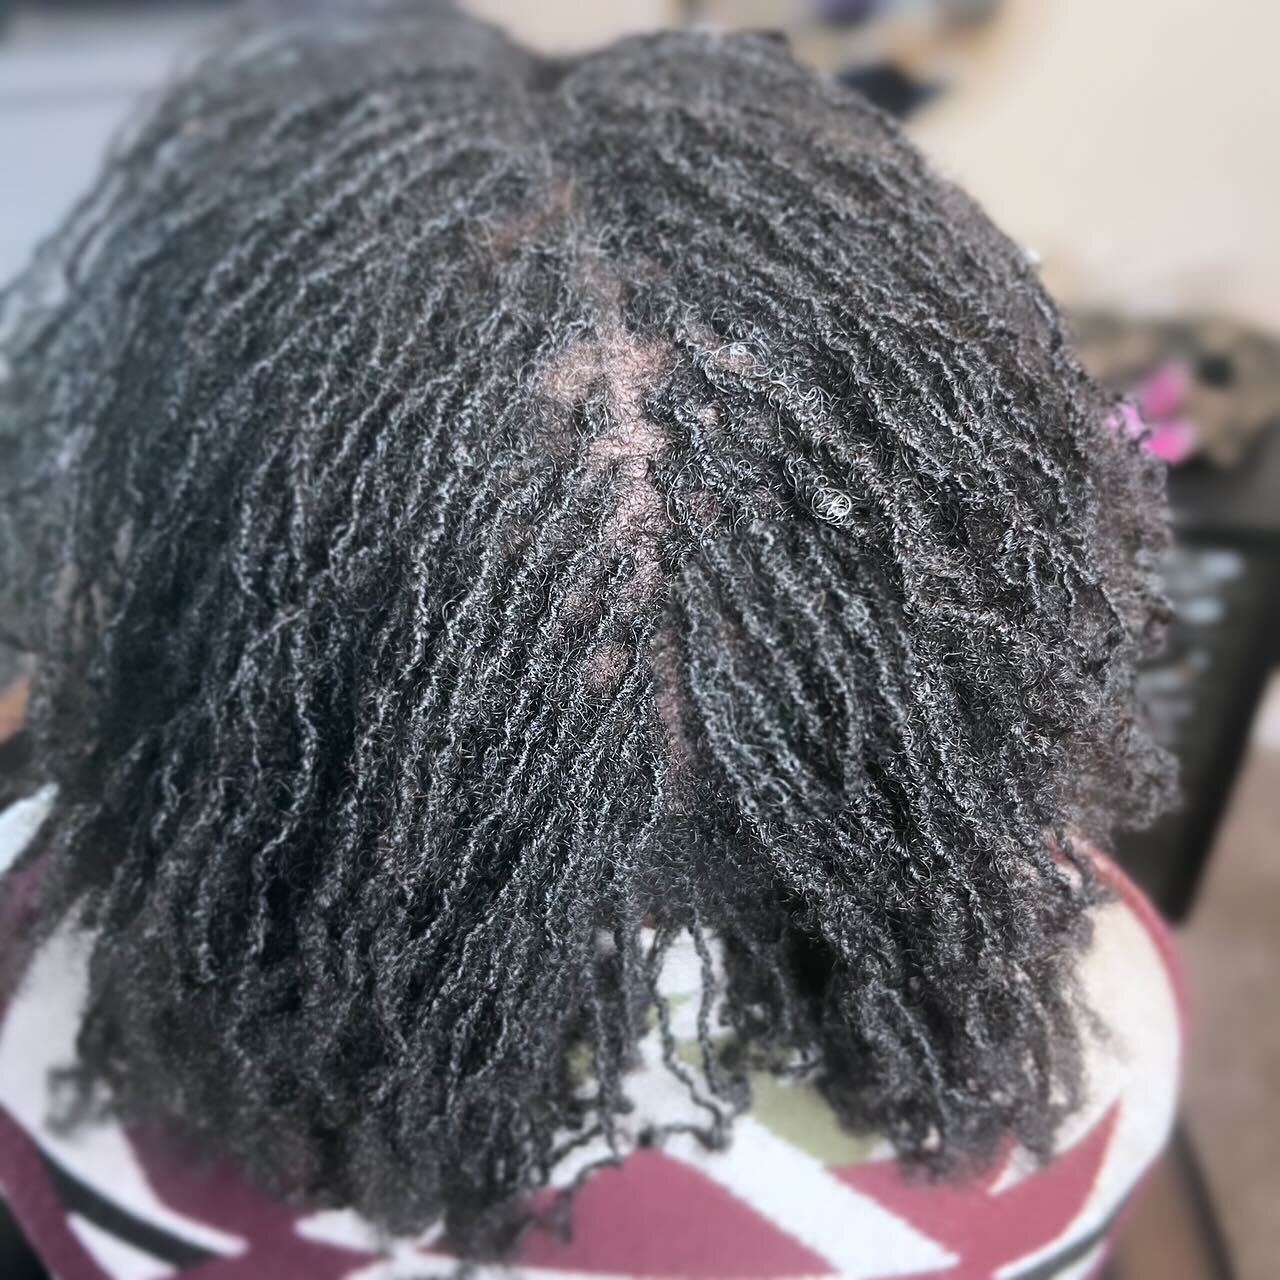 TRANSFER microlocks client.

I make sure to keep the integrity of her grid. I also check to see if locs are healthy(they are) During retie sessions, it&rsquo;s always good for clients and locticians to ask each other questions. This keeps the line of